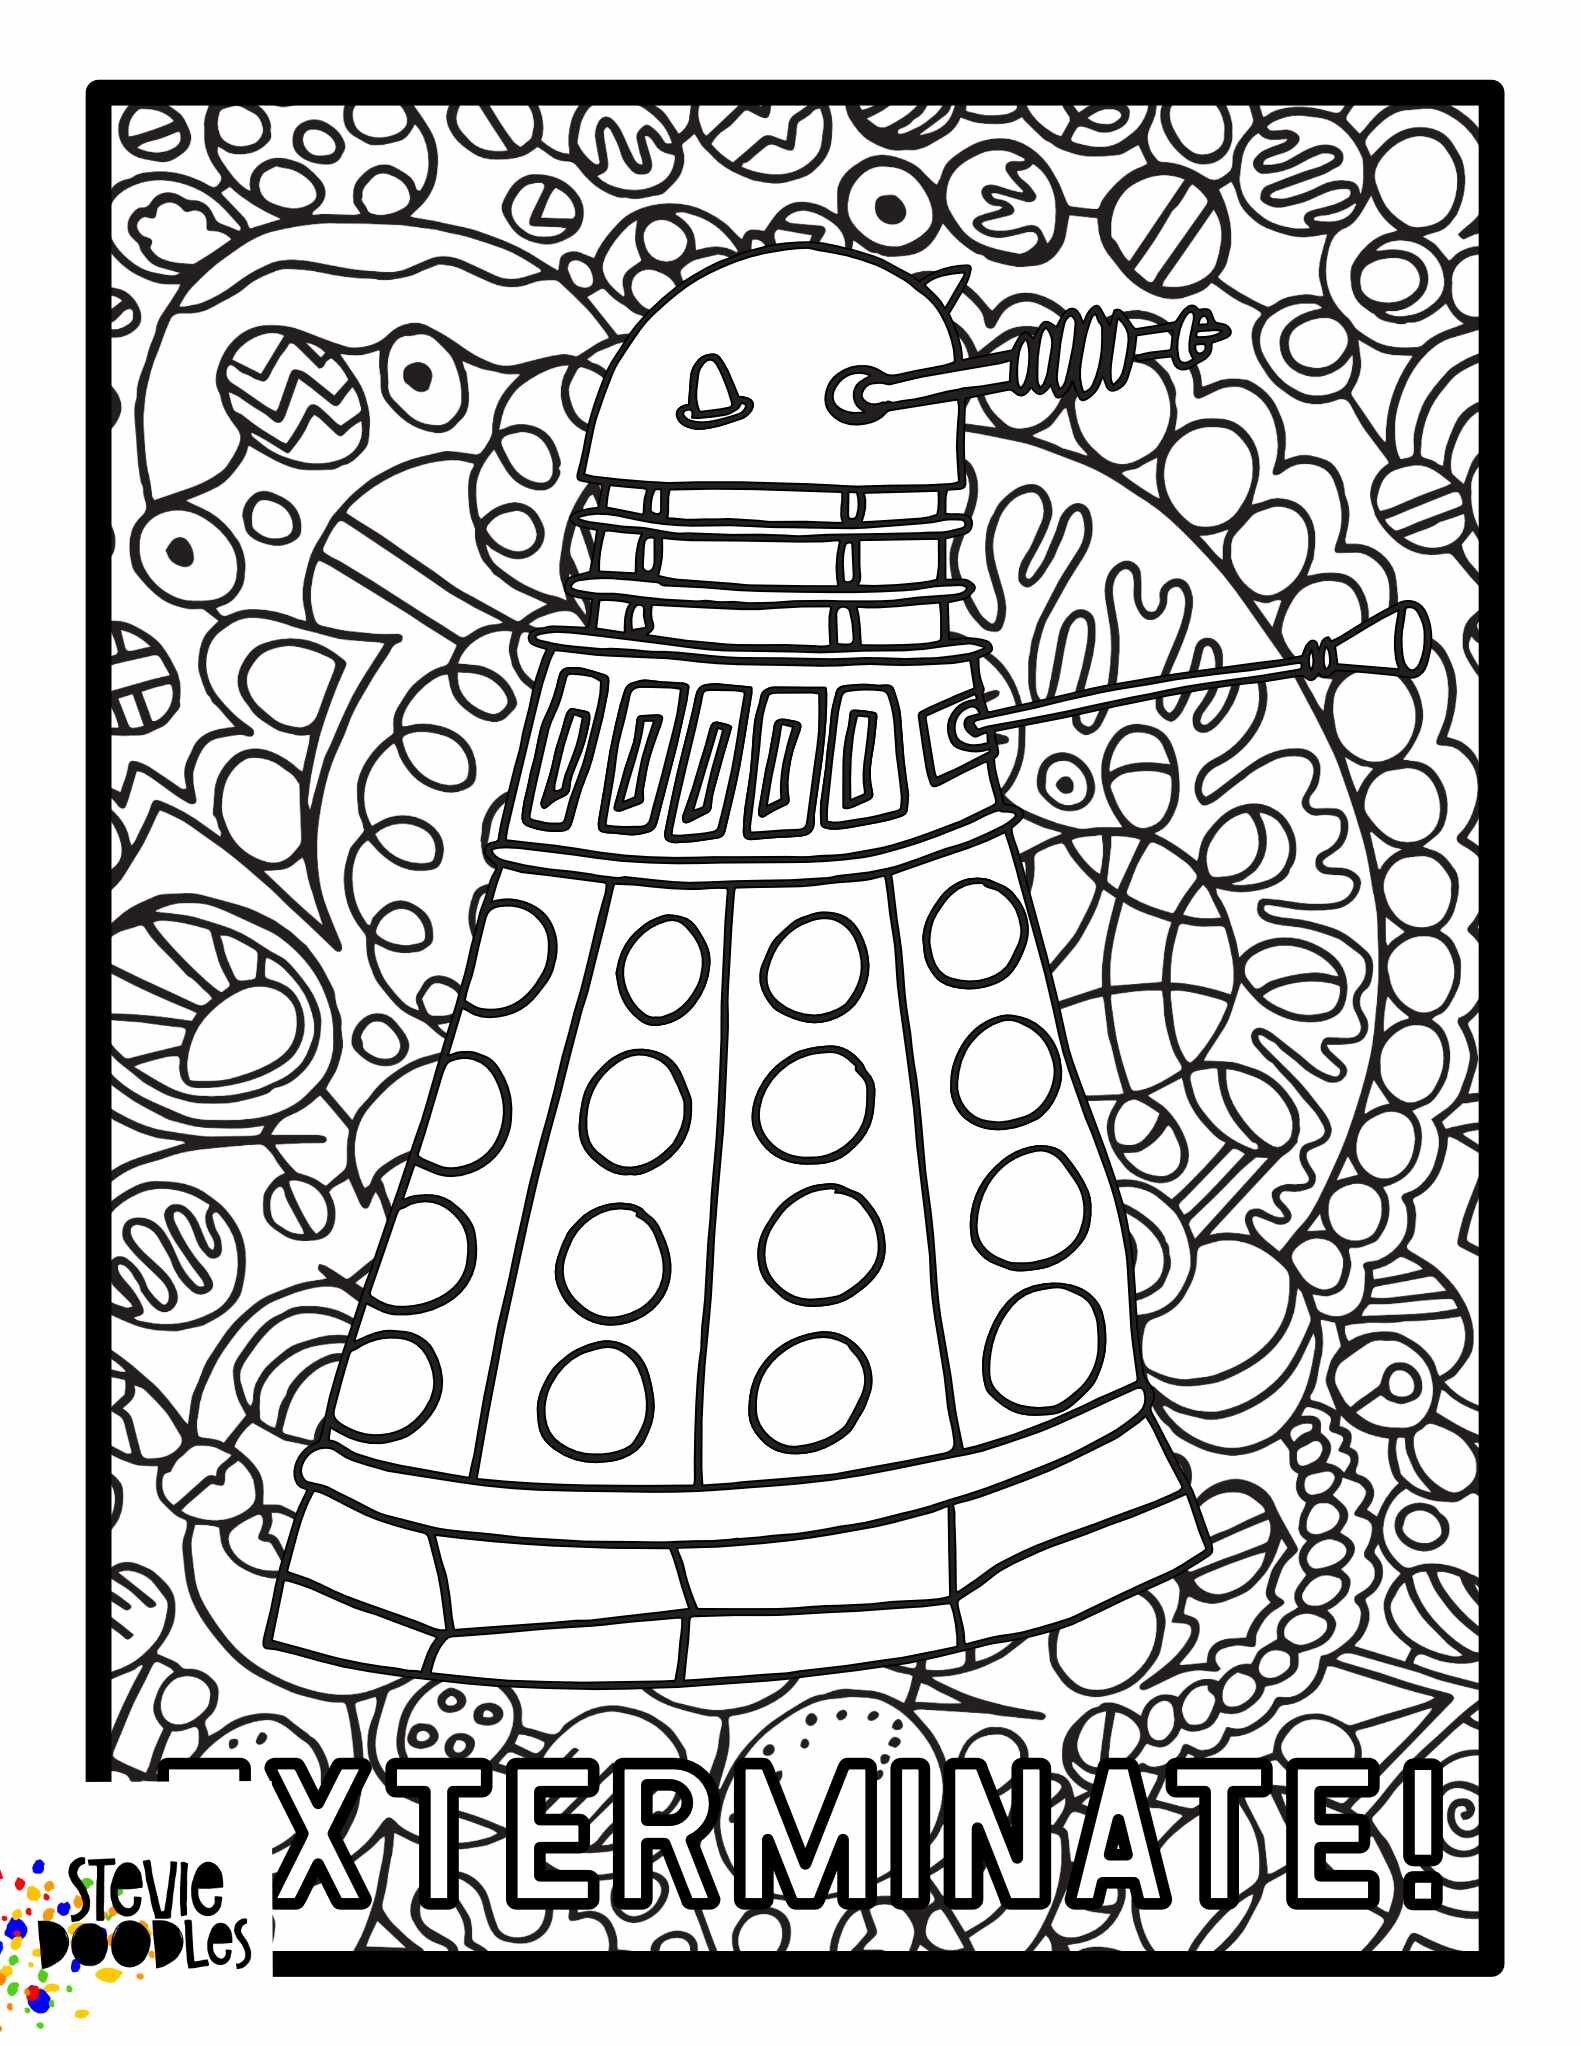 Free Printable Coloring Page - Dr. Who - Inspired Dalek CLICK HERE TO DOWNLOAD THE PAGE ABOVE